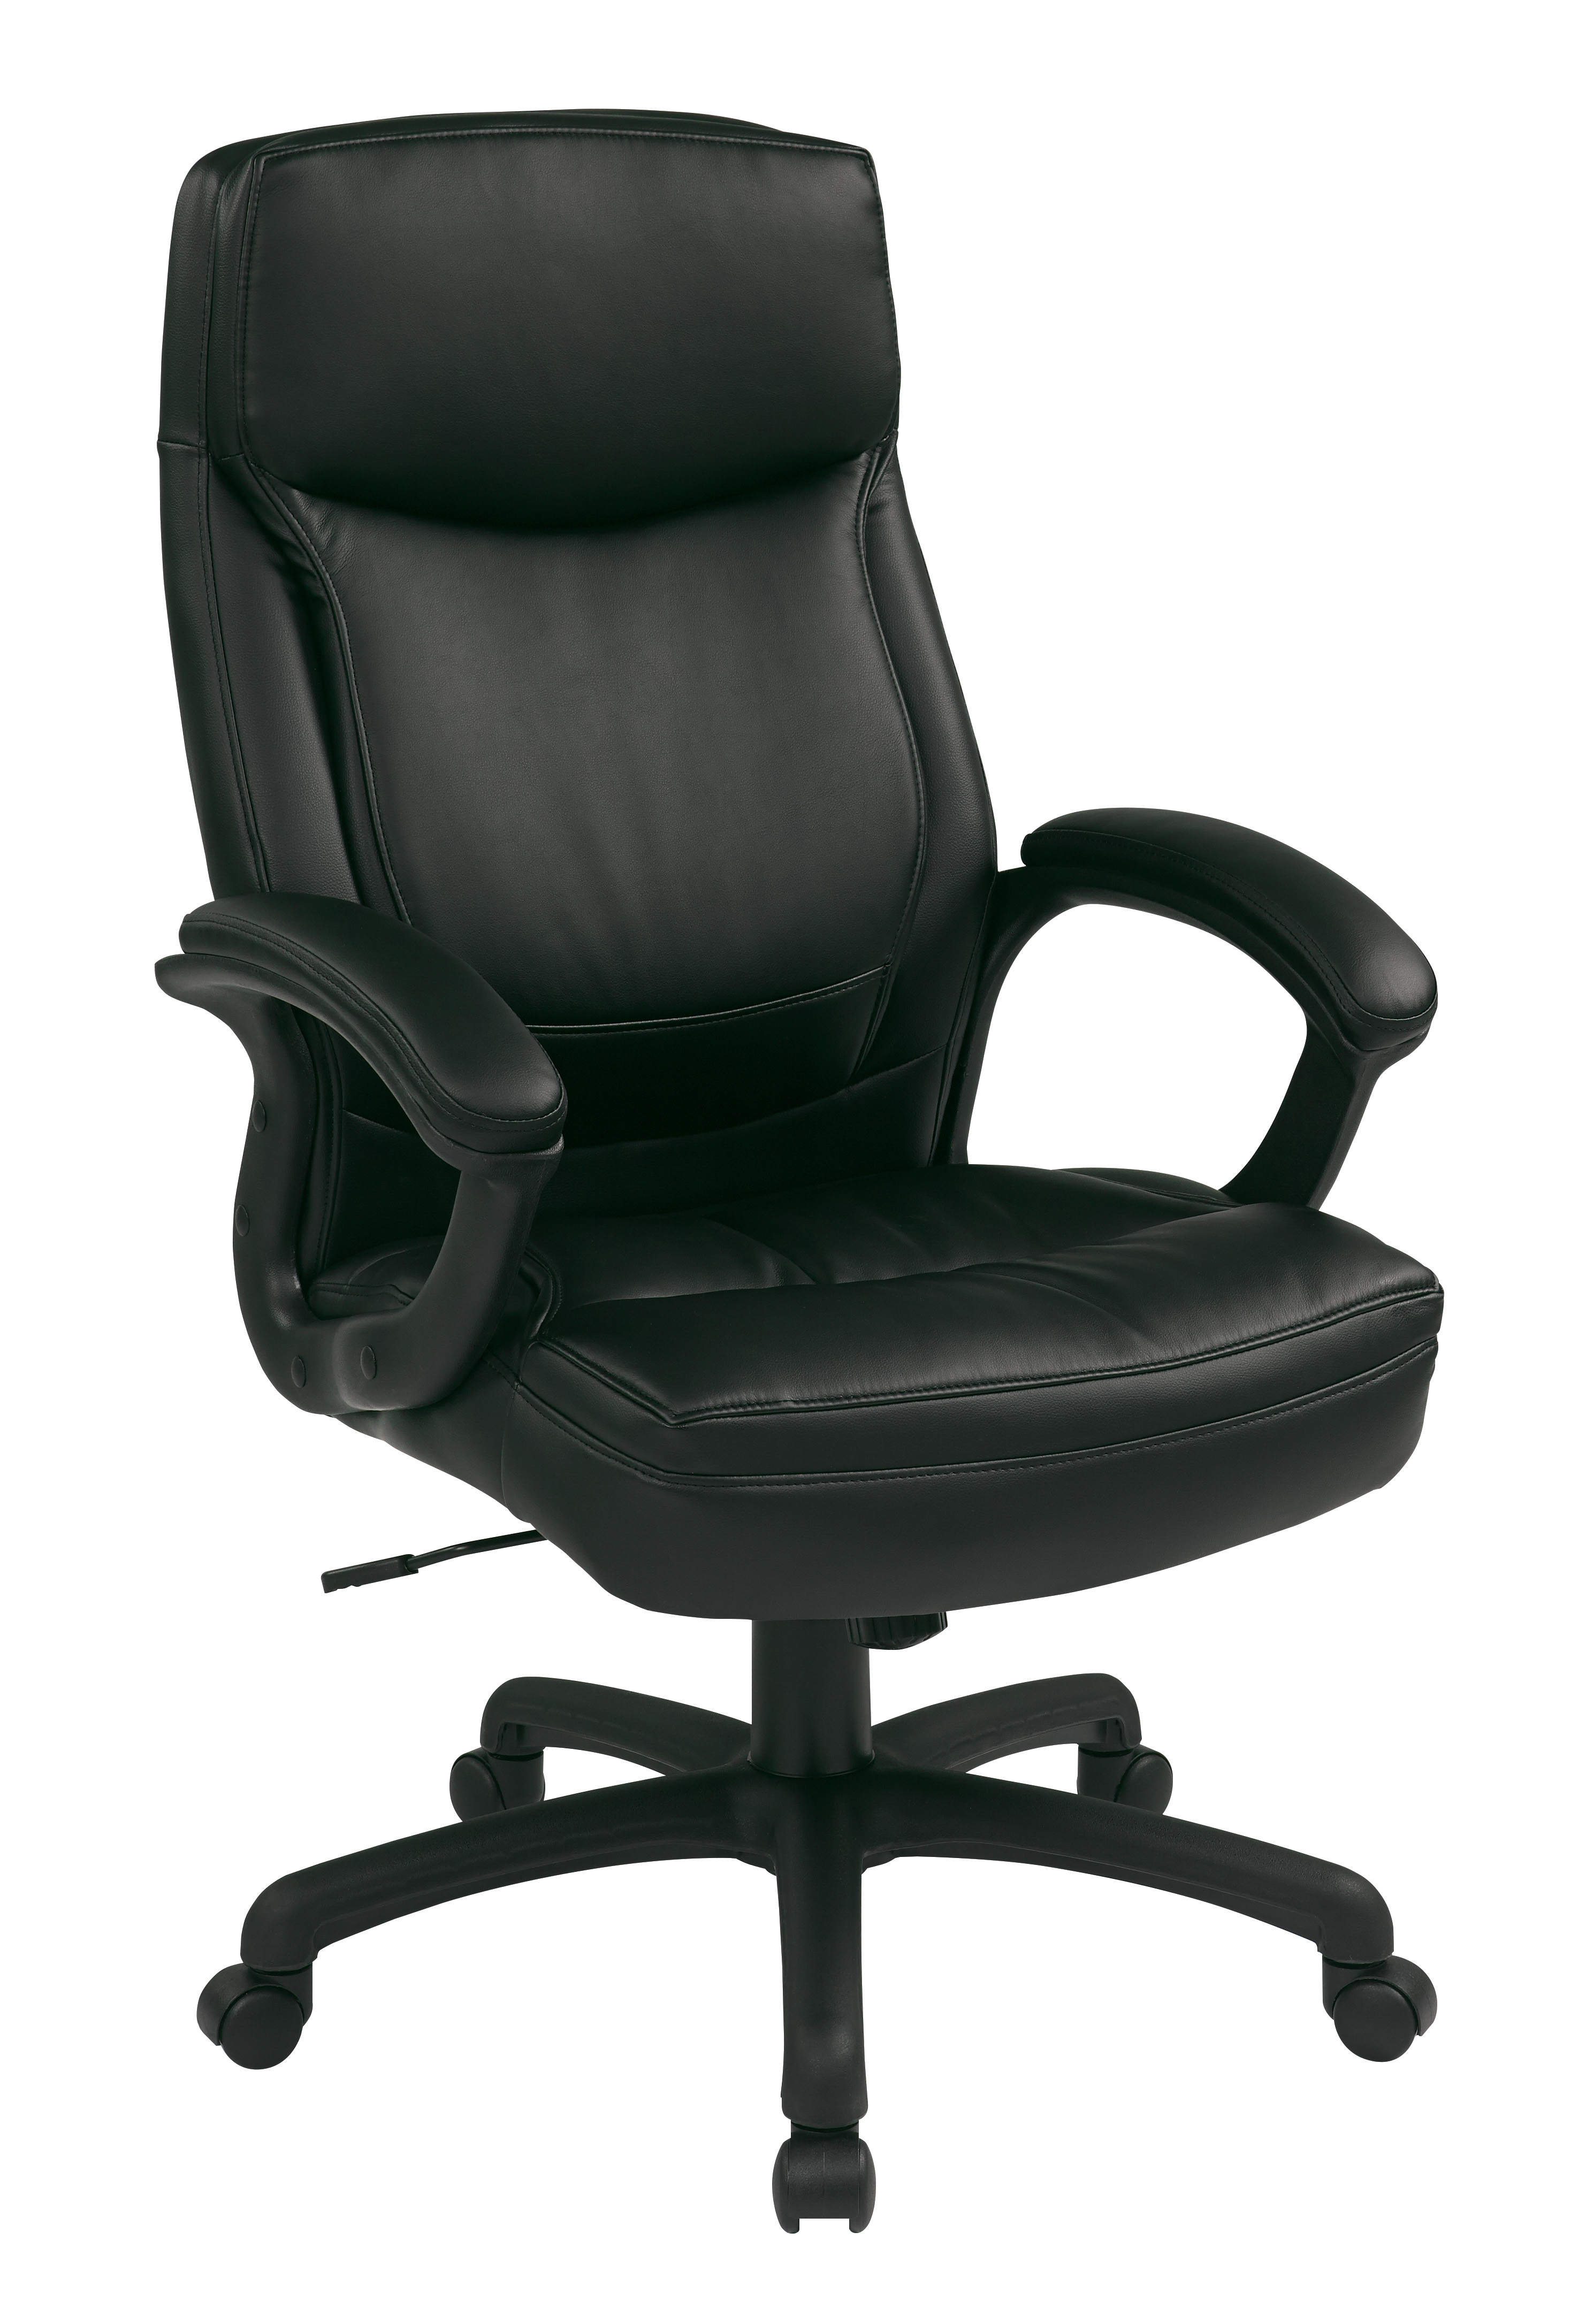 Angle View: Office Star Products - High-Back Eco Leather Executive Chair - Black